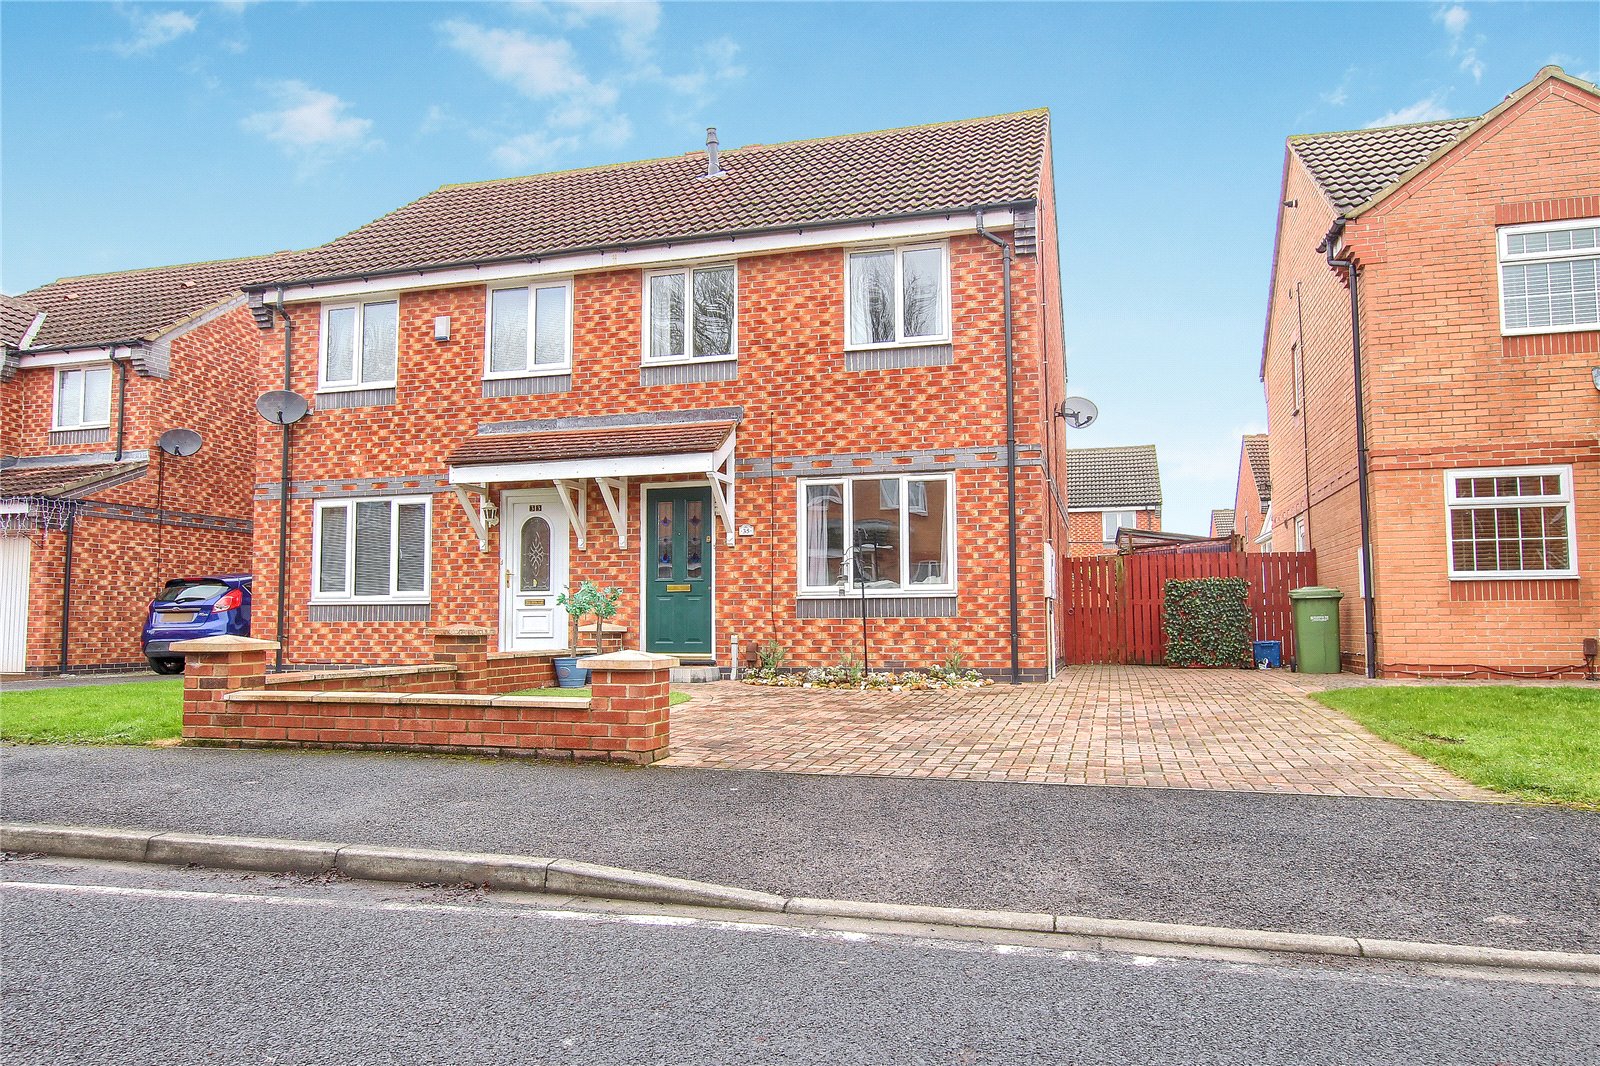 3 bed house for sale in Sir Douglas Park, Thornaby - Property Image 1